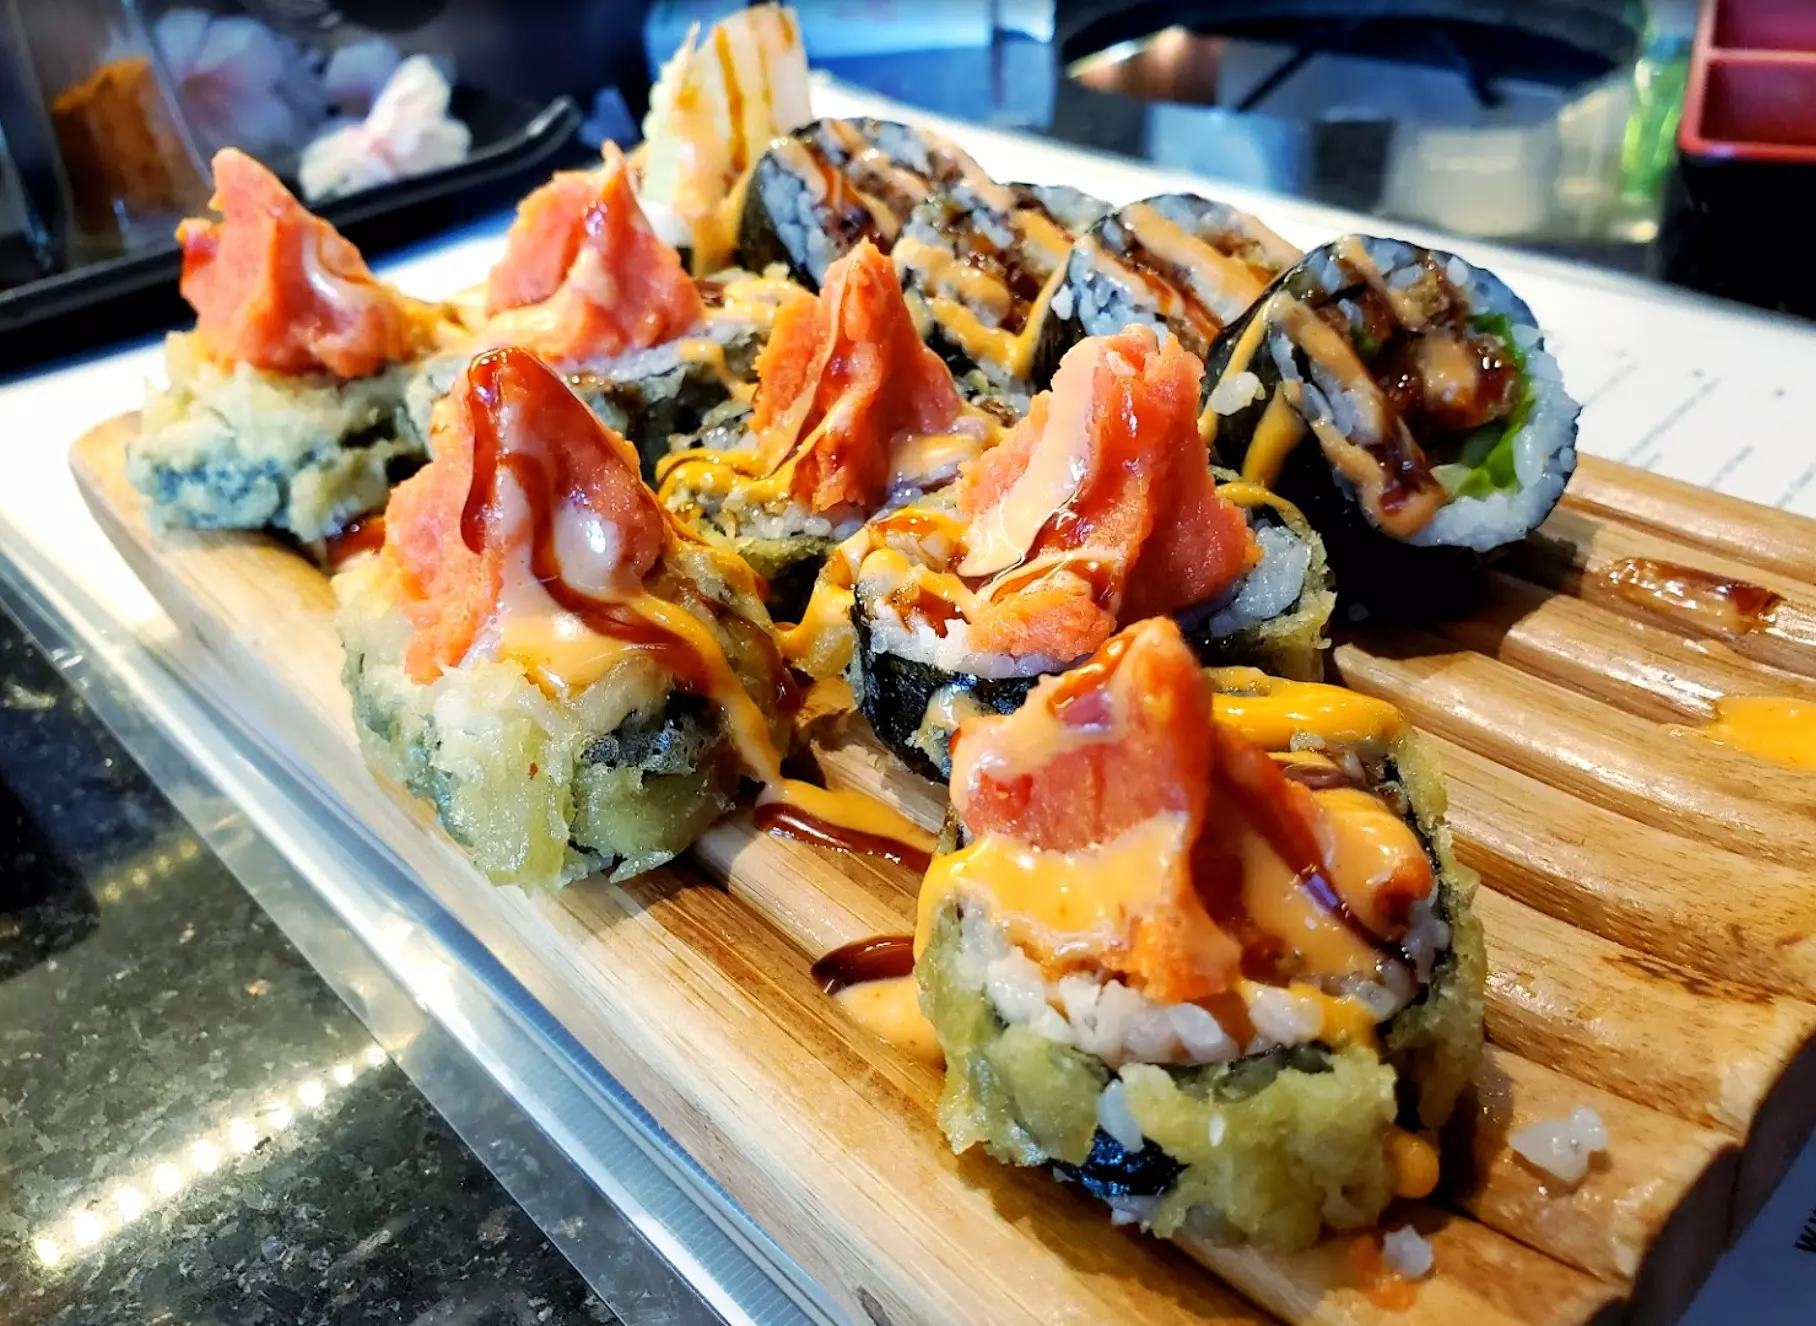 Could This Be the Best Sushi and Wagyu Beef Buffet in Colorado?